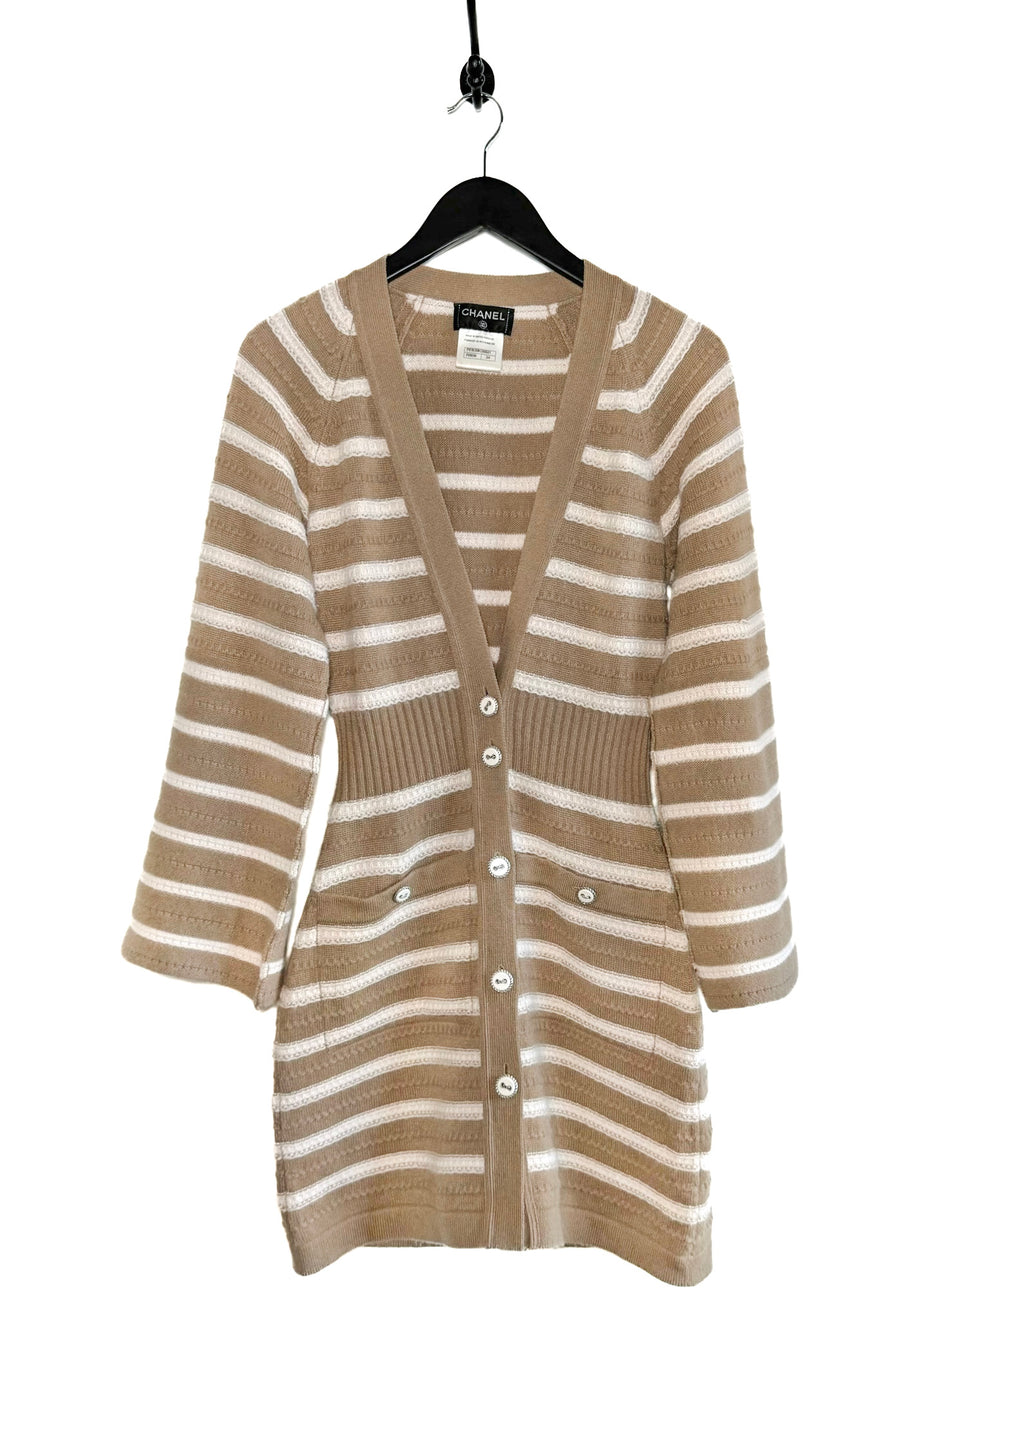 Chanel SS15 Beige Ivory Striped Long Cashmere Cardigan Sweater Dress